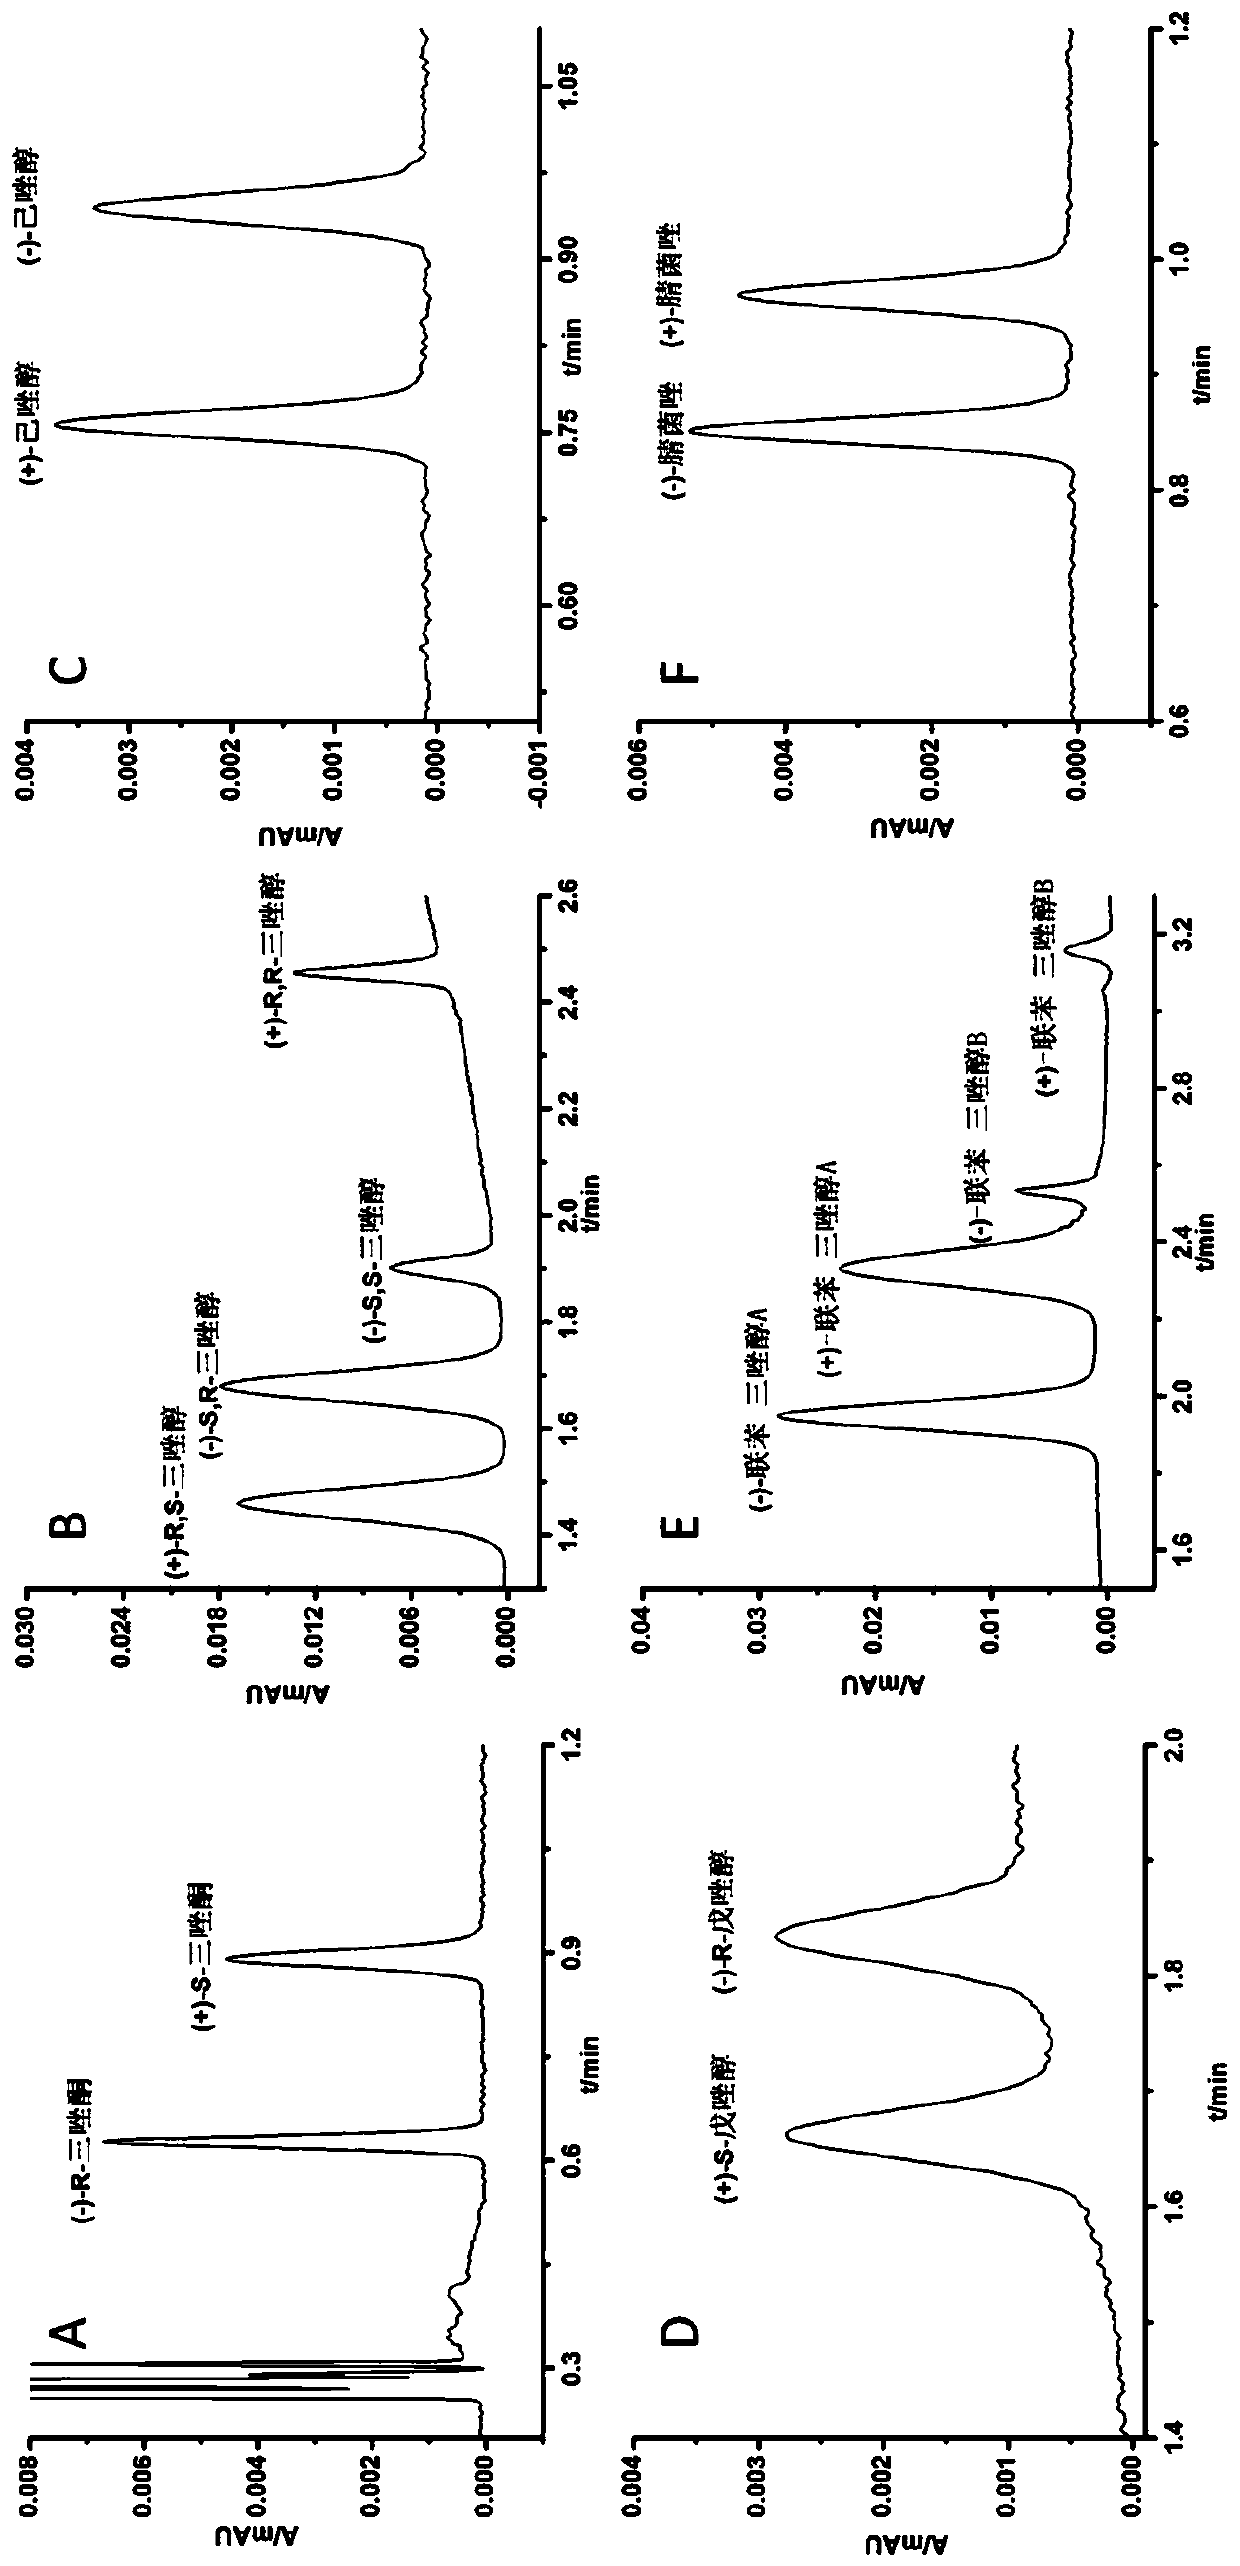 Method for resolving six triazole pesticide enantiomers and detecting and analyzing residues by ultra-performance convergence chromatography